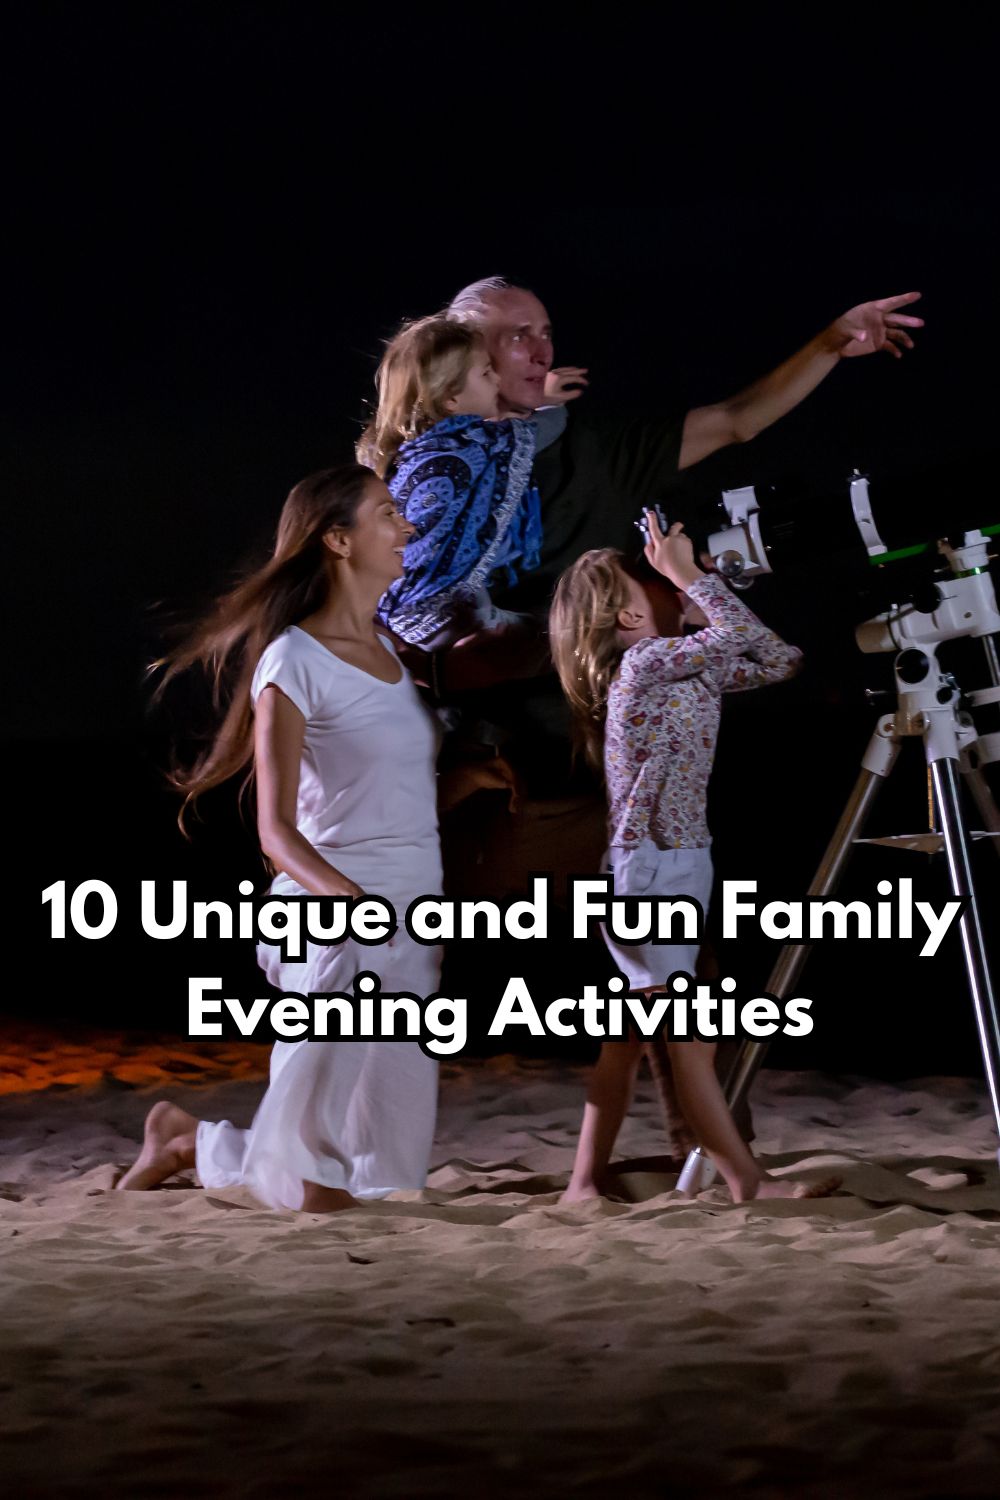 10 Unique and Fun Family Evening Activities (1)